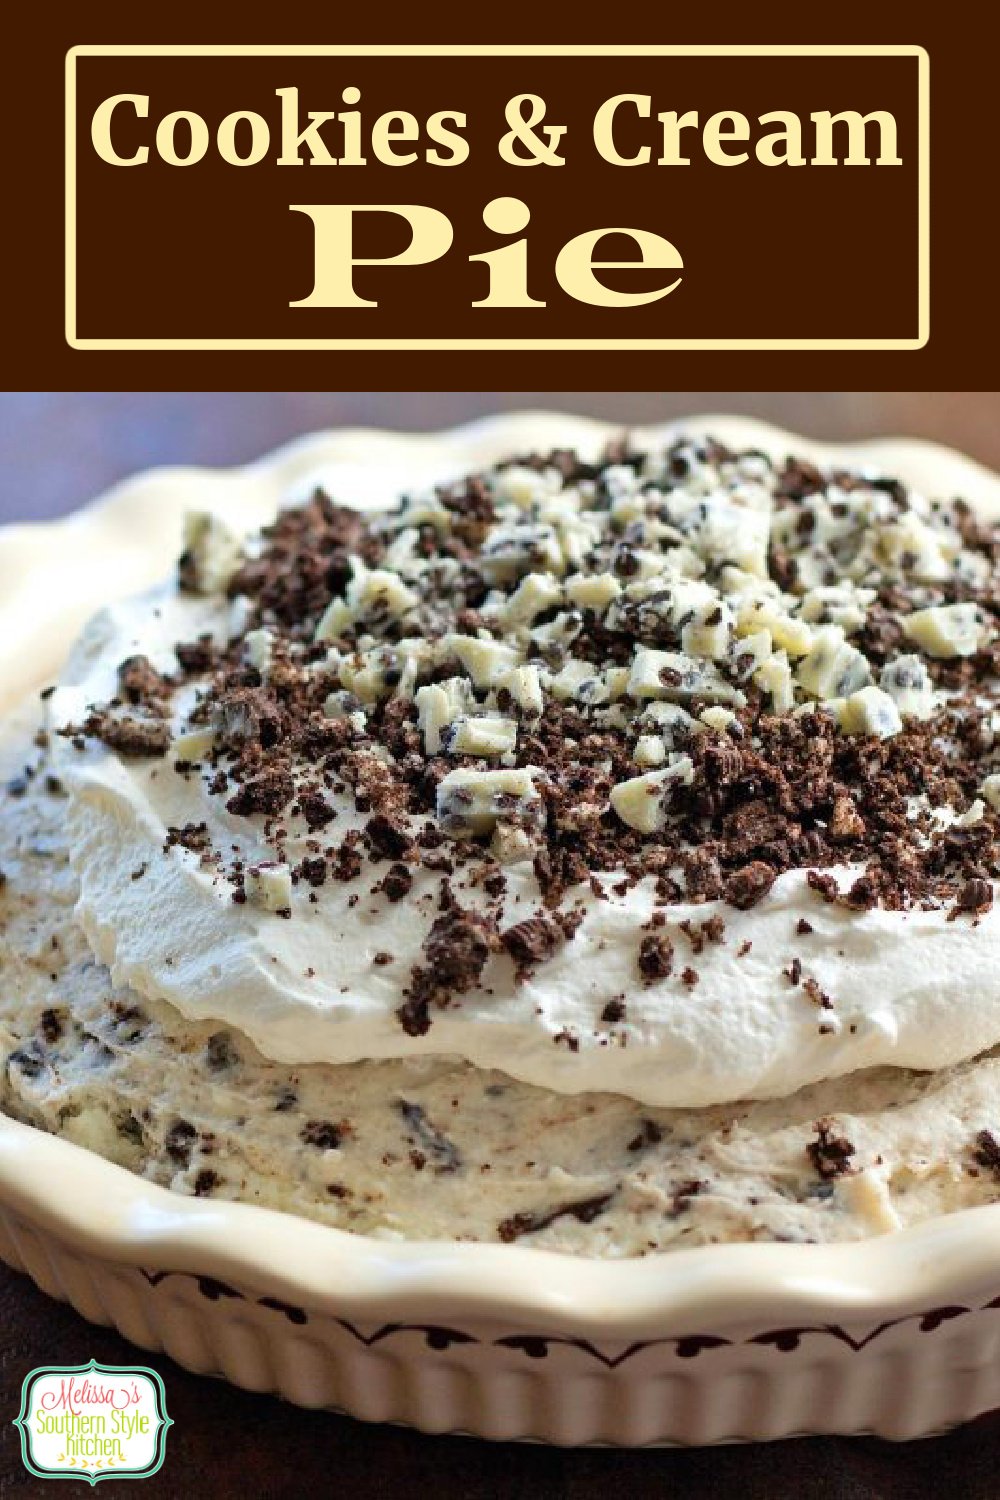 This easy Cookies and Cream Pie makes the perfect sweet ending for your meal #cookiesandcream #Oreos #pierecipes #cookiesandcreampie #southernrecipes #chocolate #whitechocolate #oreopie #desserts #dessertfoodrecipes via @melissasssk